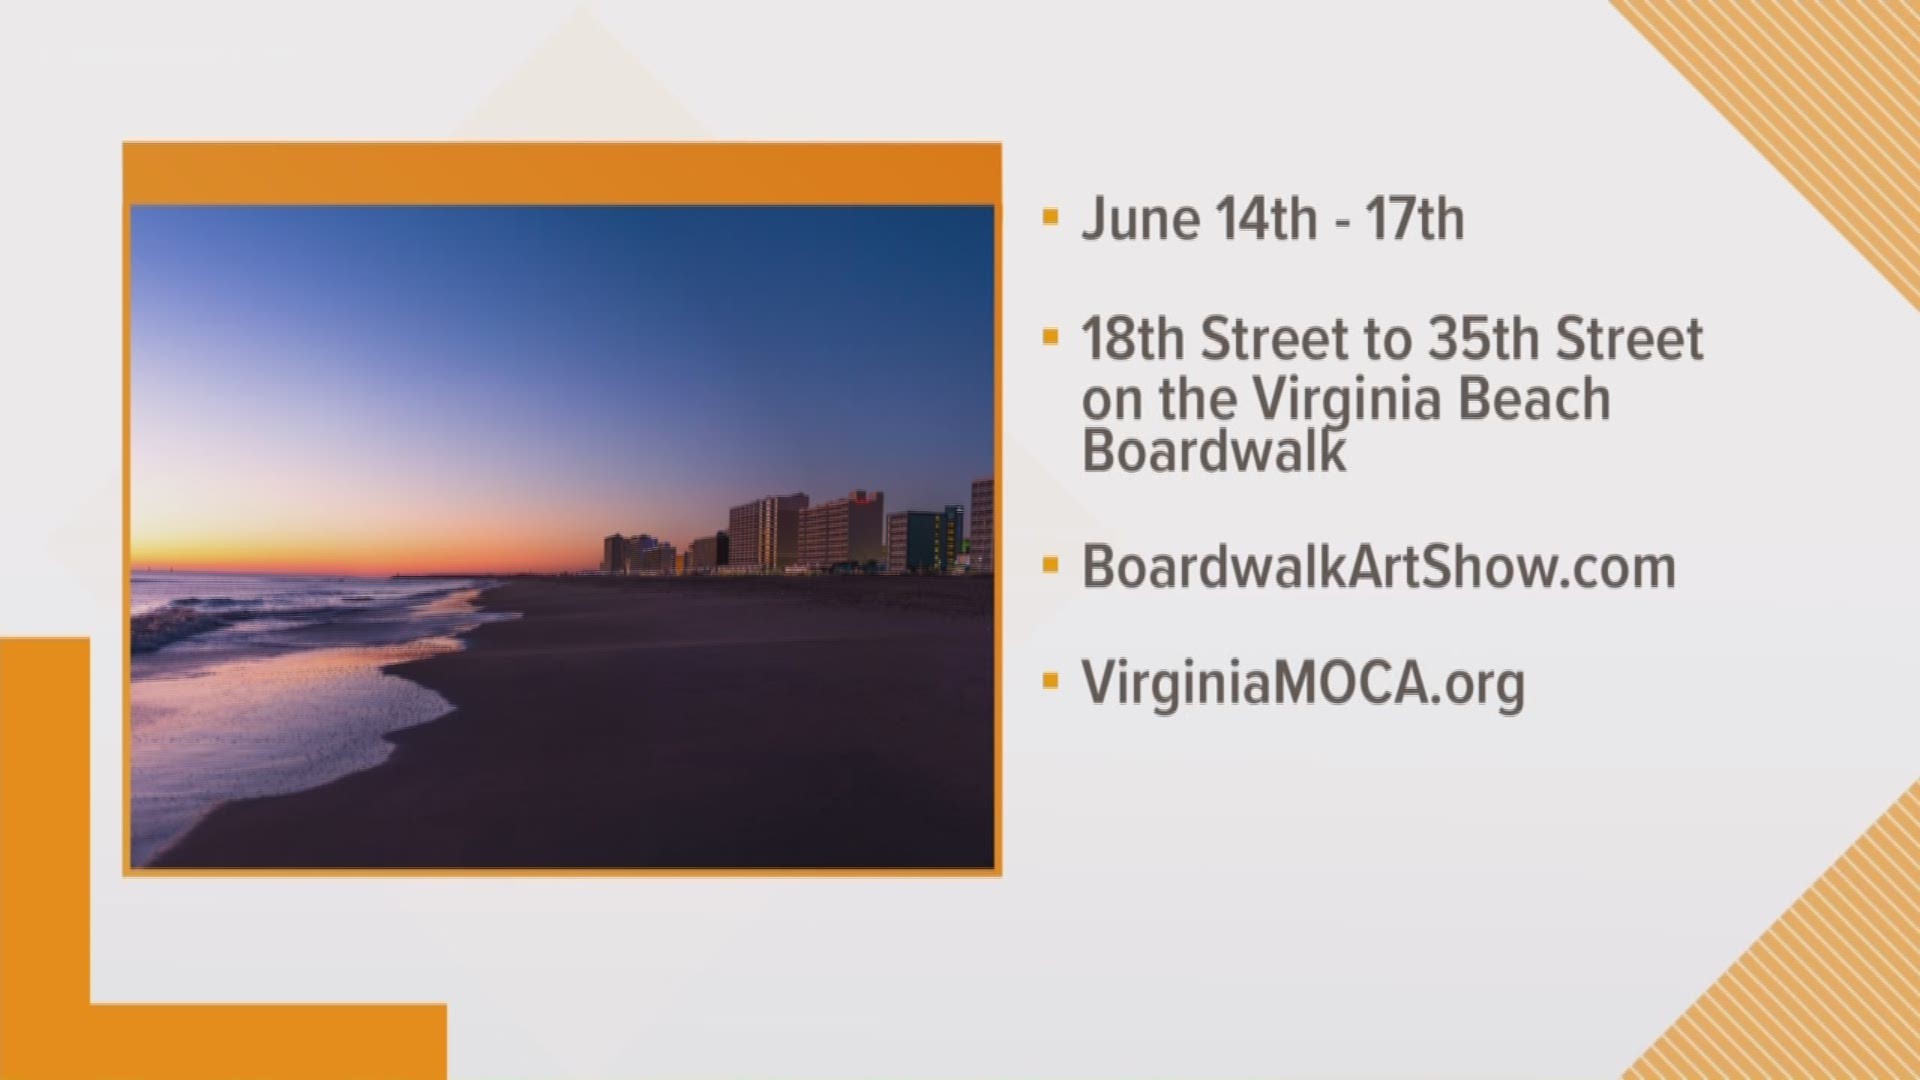 Virginia MOCA is hosting its 63rd annual Boardwalk Art Show at the oceanfront, which will feature more than 300 artists from across the U.S.